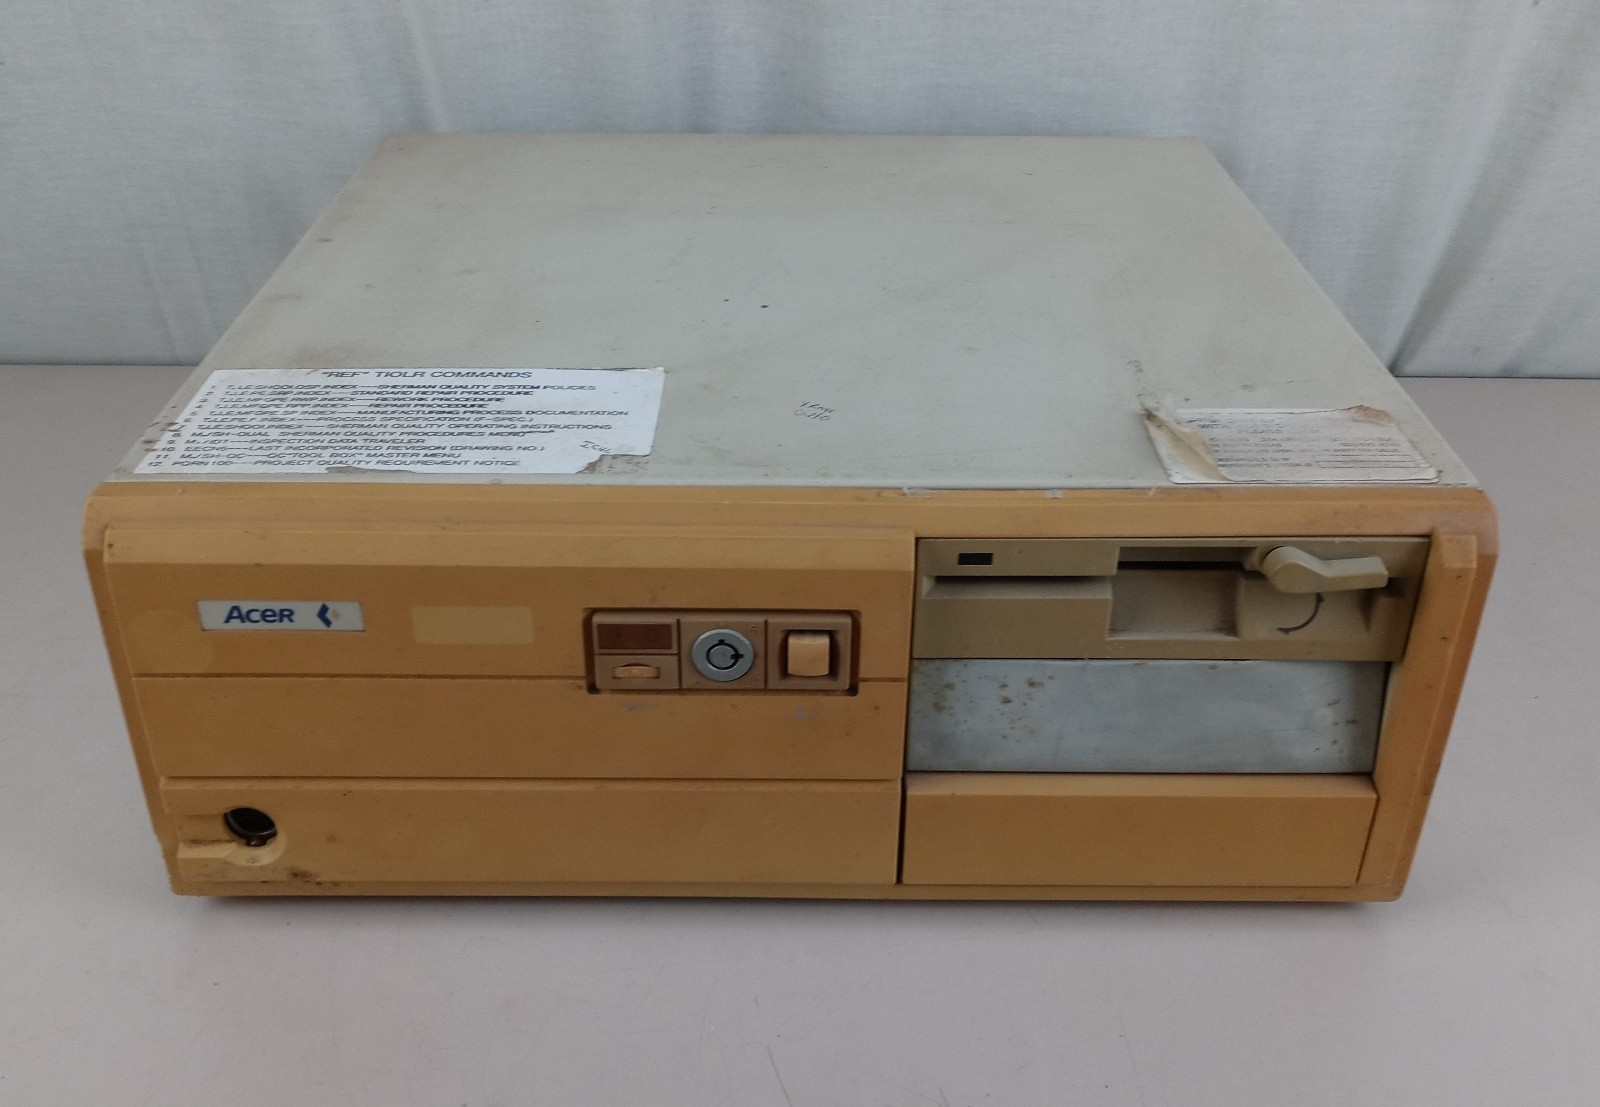 Vintage 1989 Acer 910 Personal Computer Am386SX/SXL-25 6Mb - AS IS